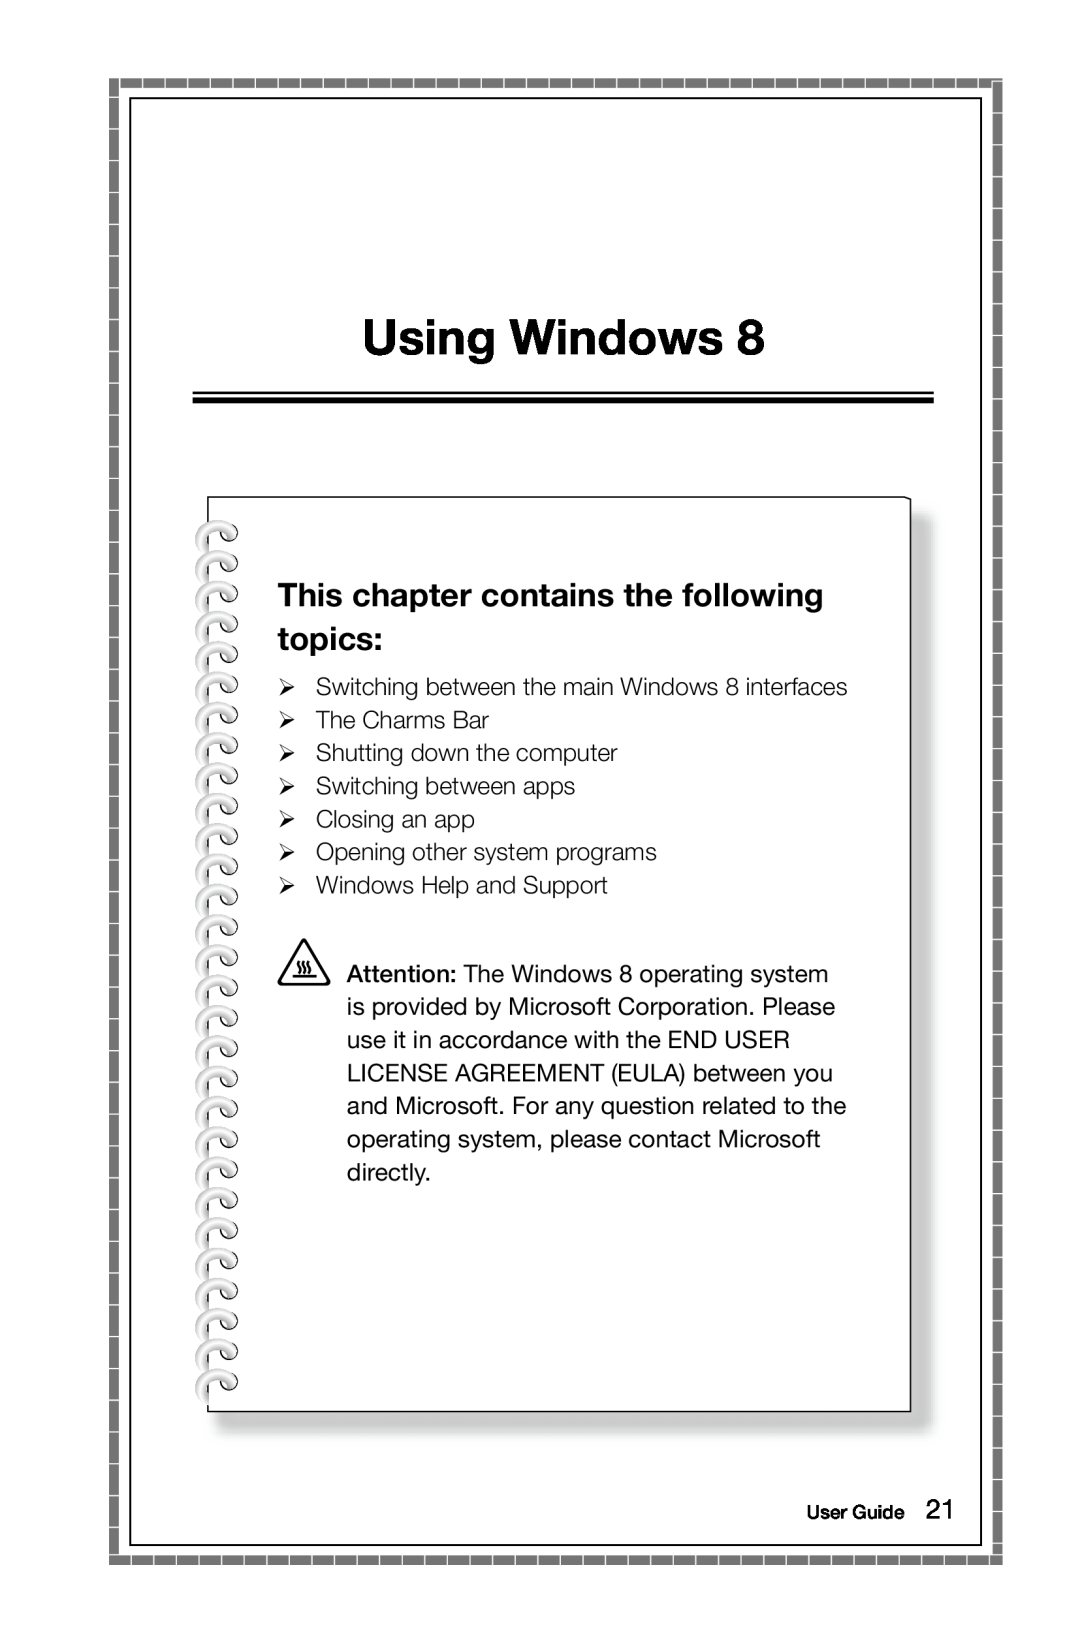 Lenovo 10120/90A0 [K450 NON-ES], 10121/90A1 [K450 ES] manual Using Windows, This chapter contains the following topics 